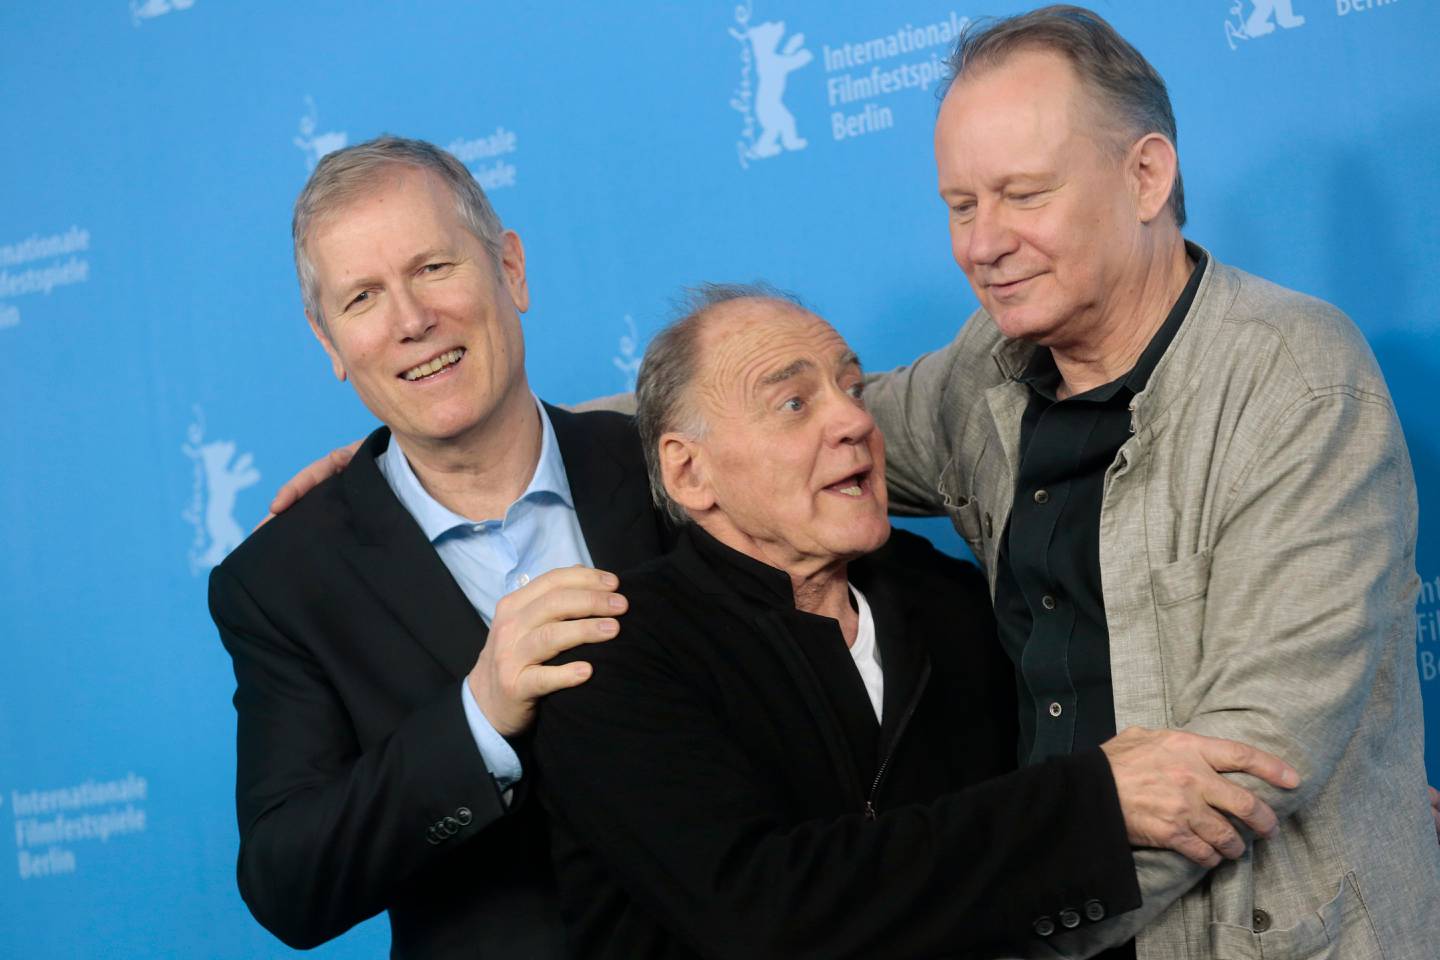 From left, director Hans Petter Moland, actors Bruno Ganz and actor Stellan Skarsgard pose for photographers at the photo call for the film In Order of Disappearance during the International Film Festival Berlinale in Berlin, Monday, Feb. 10, 2014. (AP Photo/Markus Schreiber)